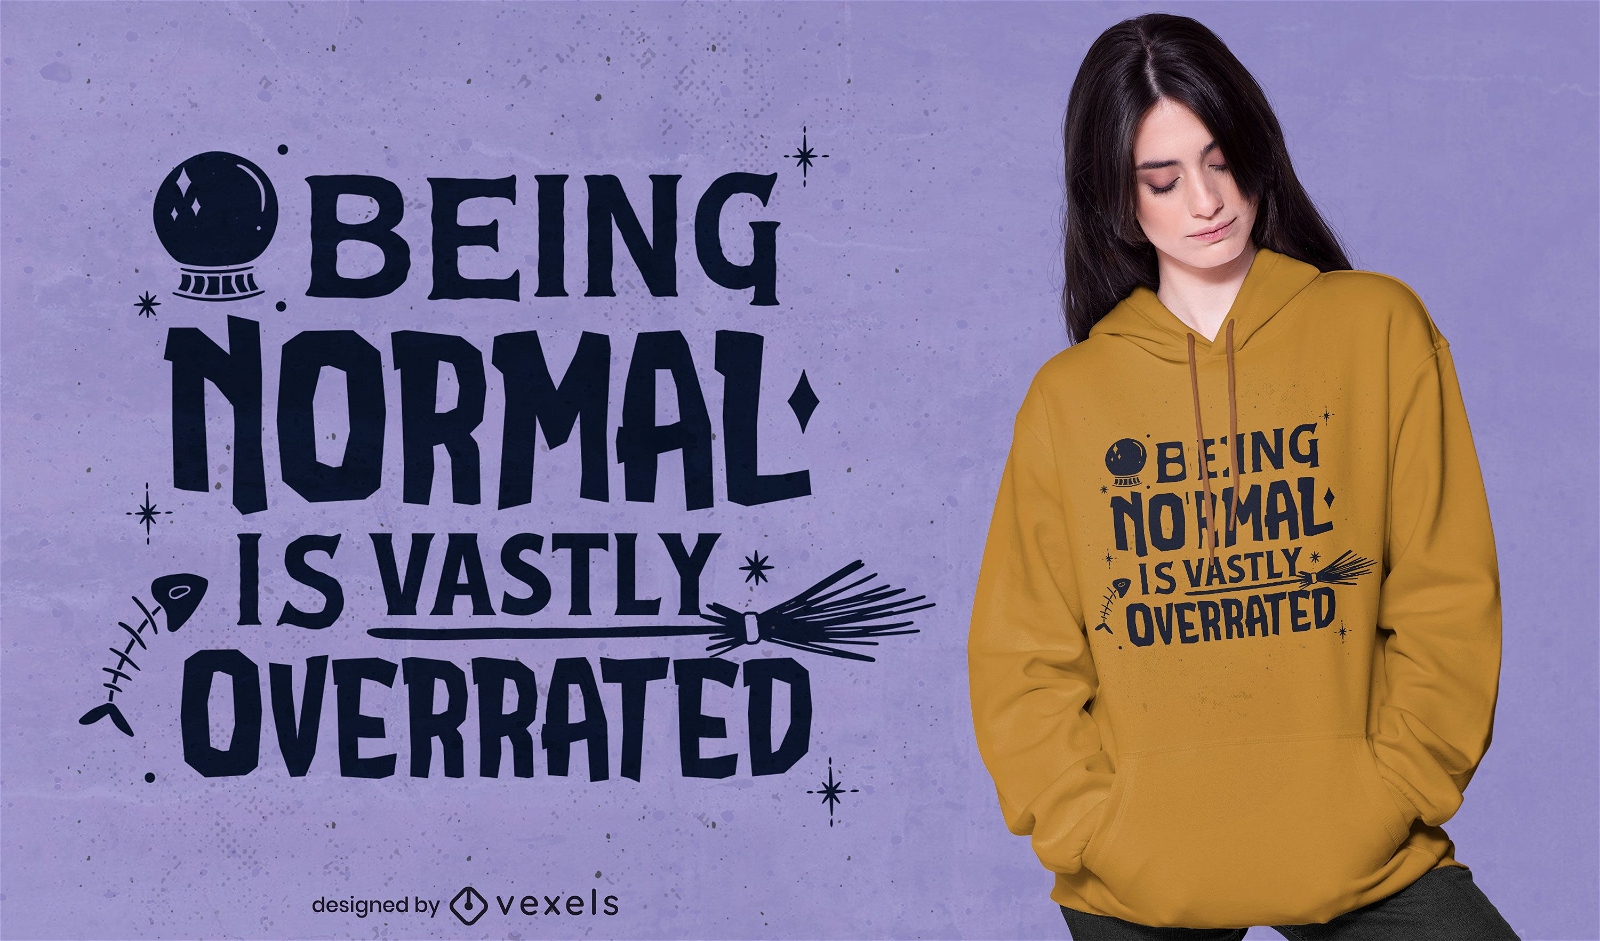 Normal is overrated t-shirt design